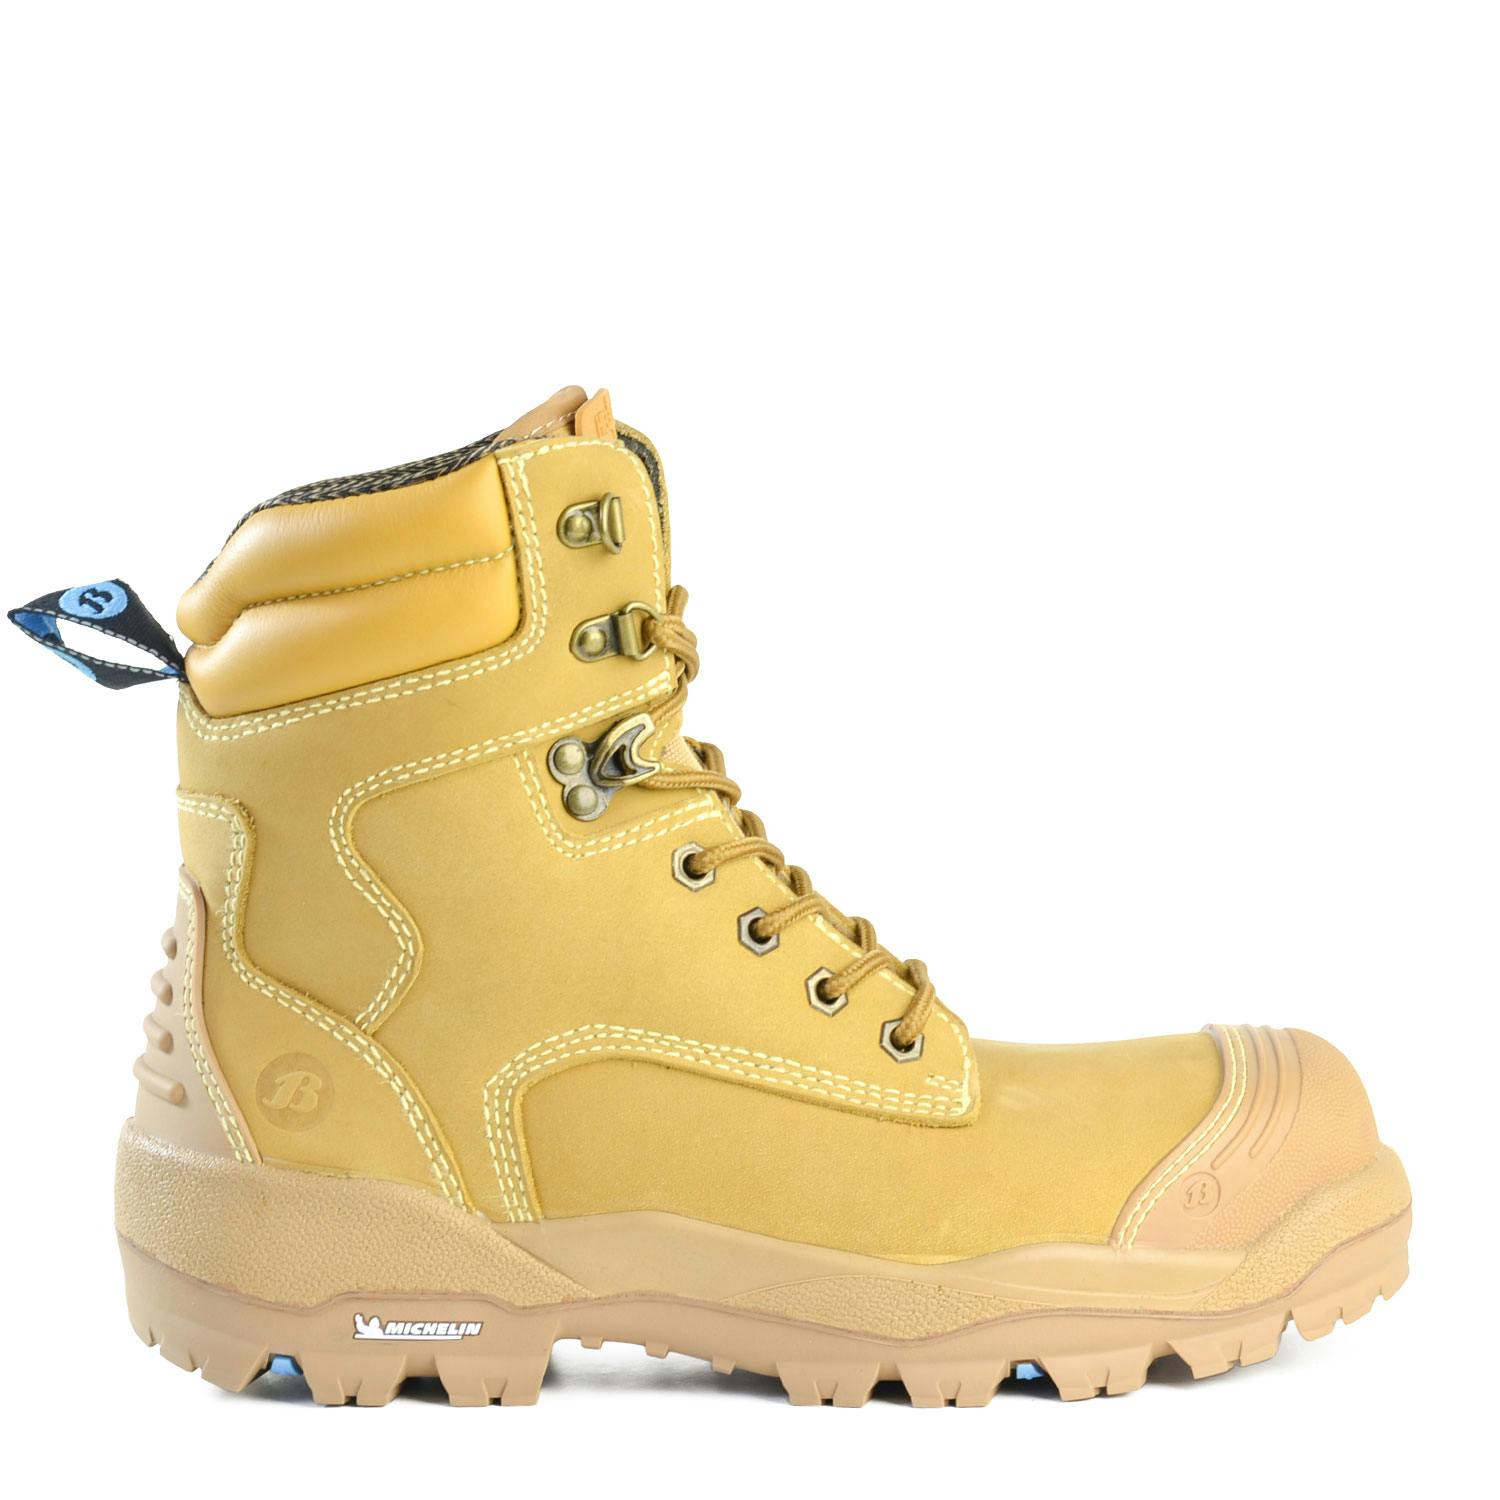 Bata Industrials Longreach-Lace Ultra - Wheat Sc Lace Safety Boot_1